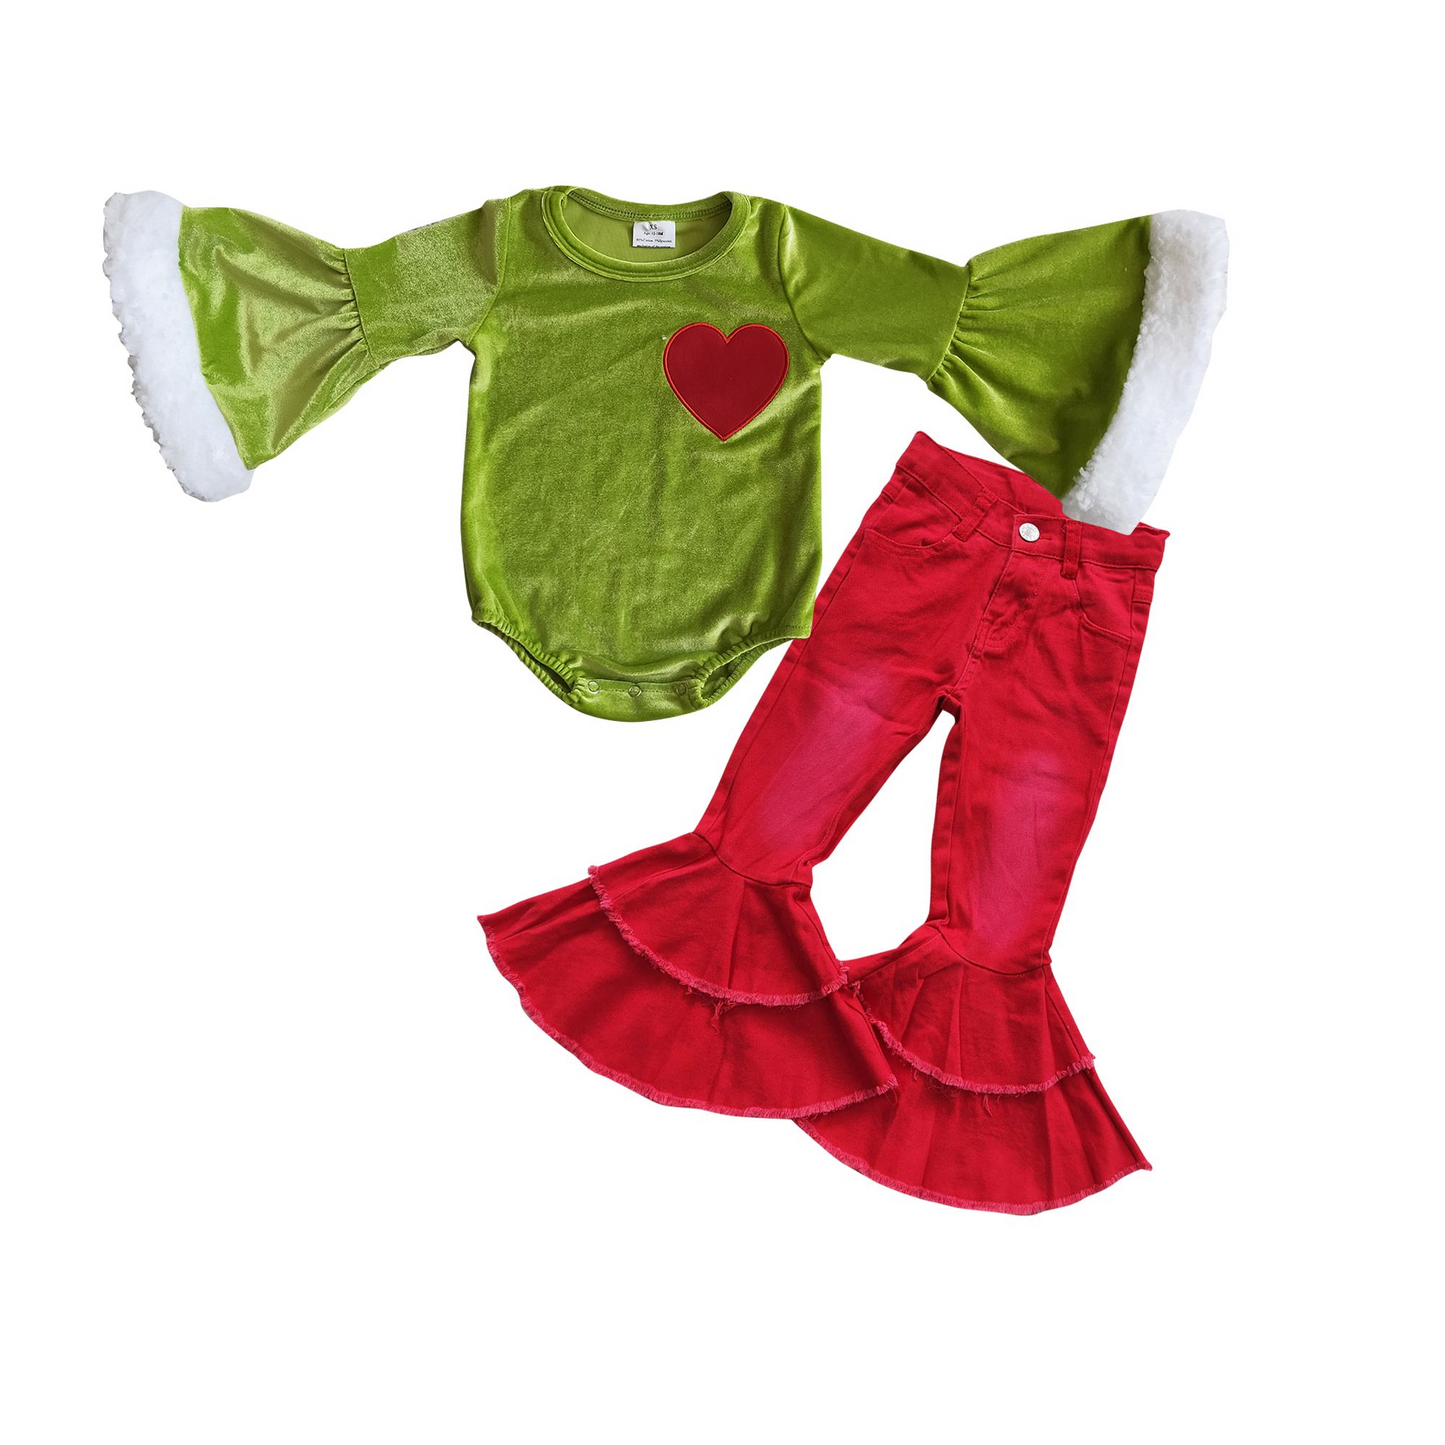 Heart green face romper 6 A4-4 red denim pants P0006 girls Christmas outfits